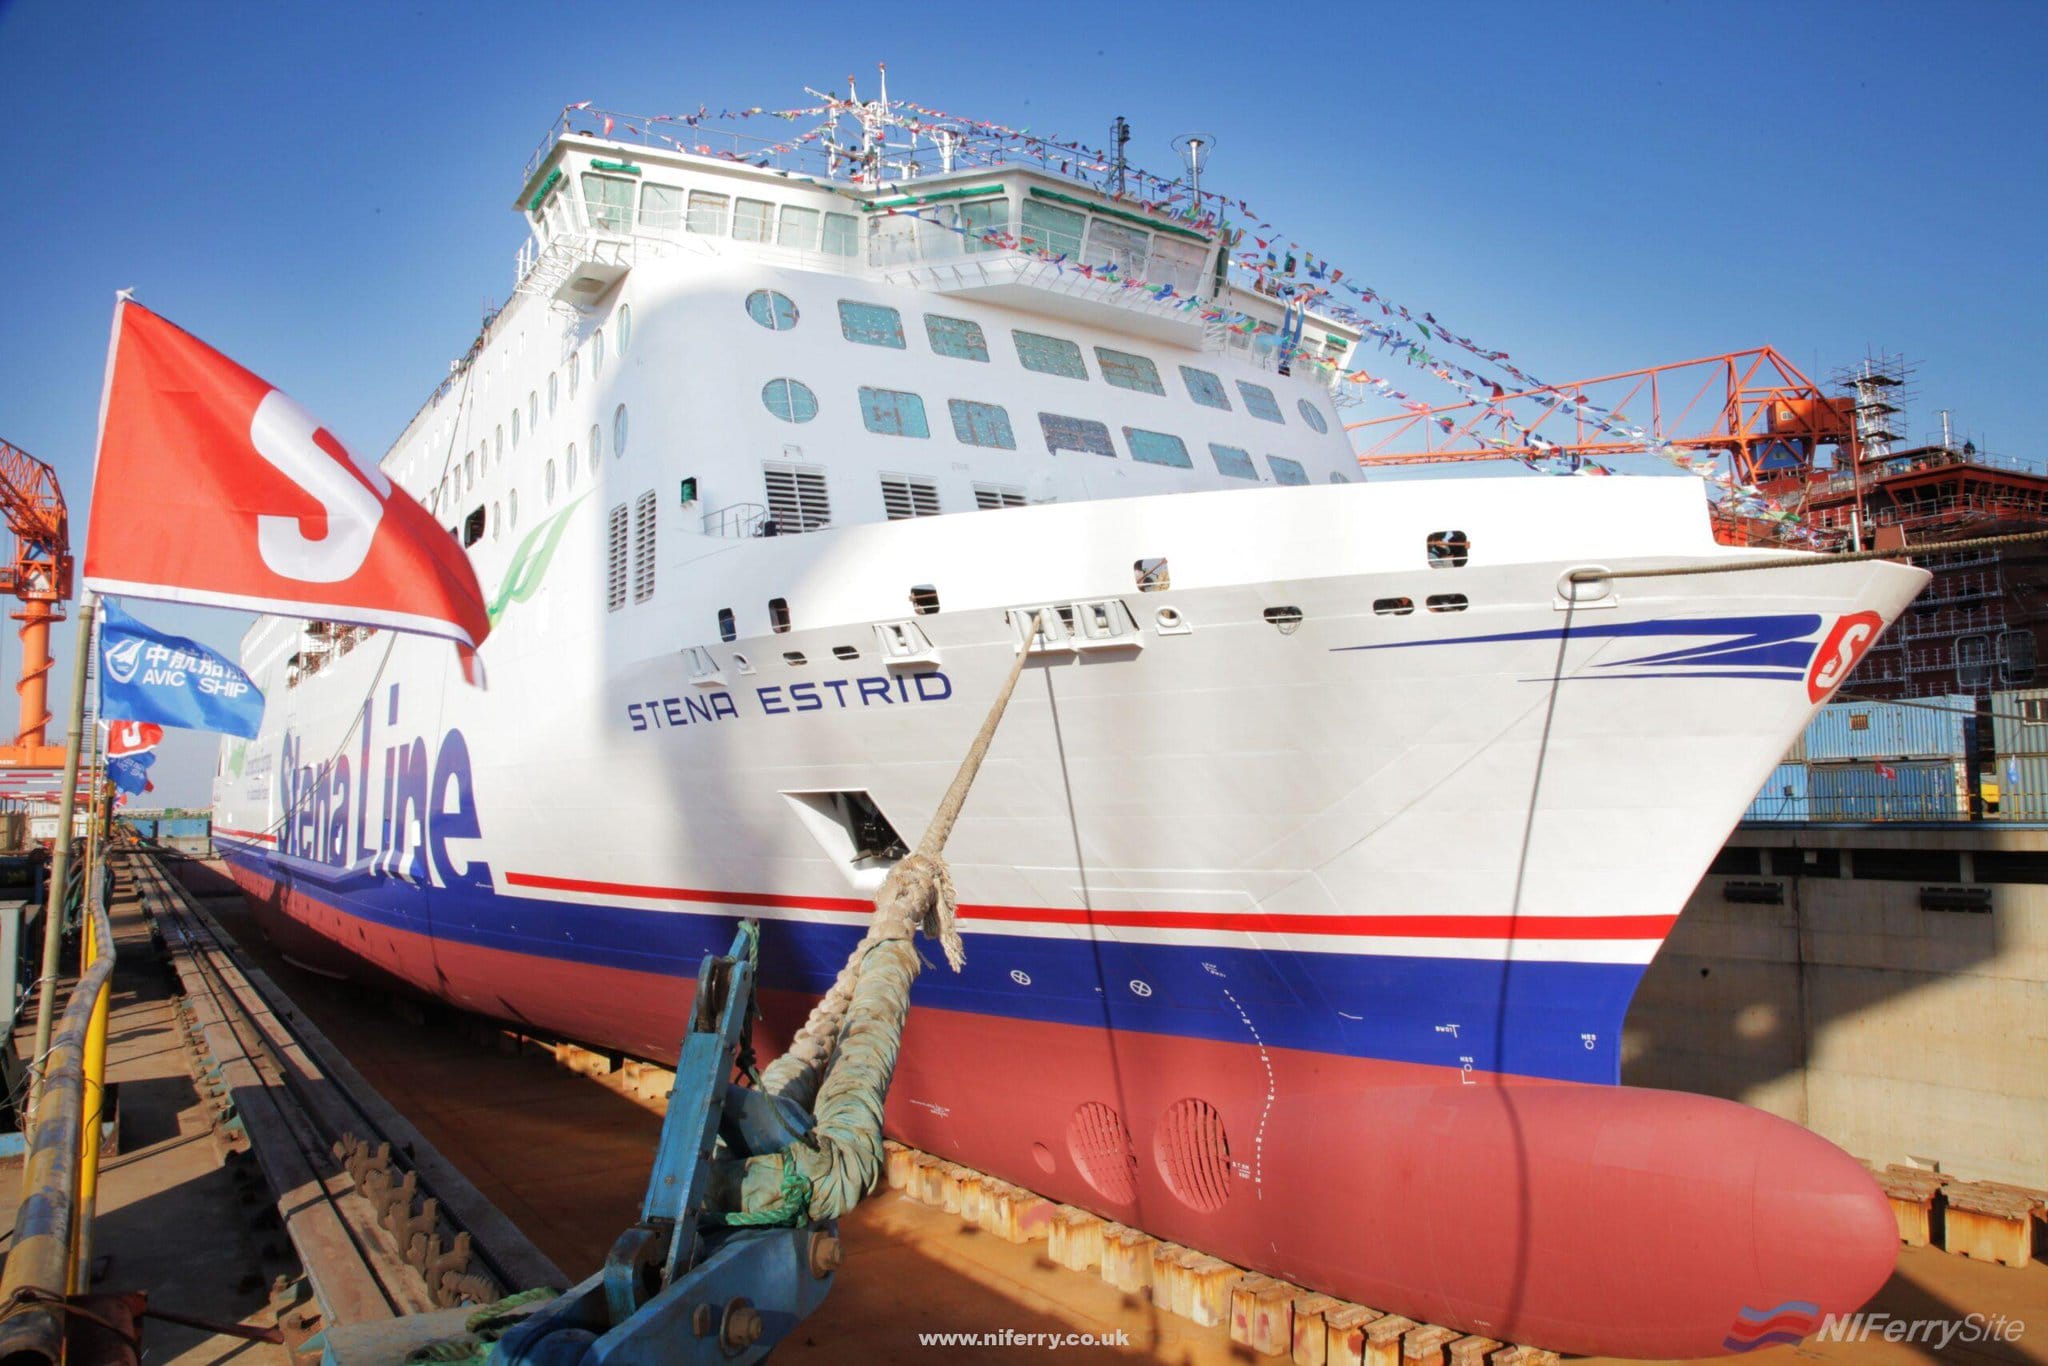 The first E-Flexer, named Stena Estrid, just prior to launch on January 16th 2019. Stena RoRo.